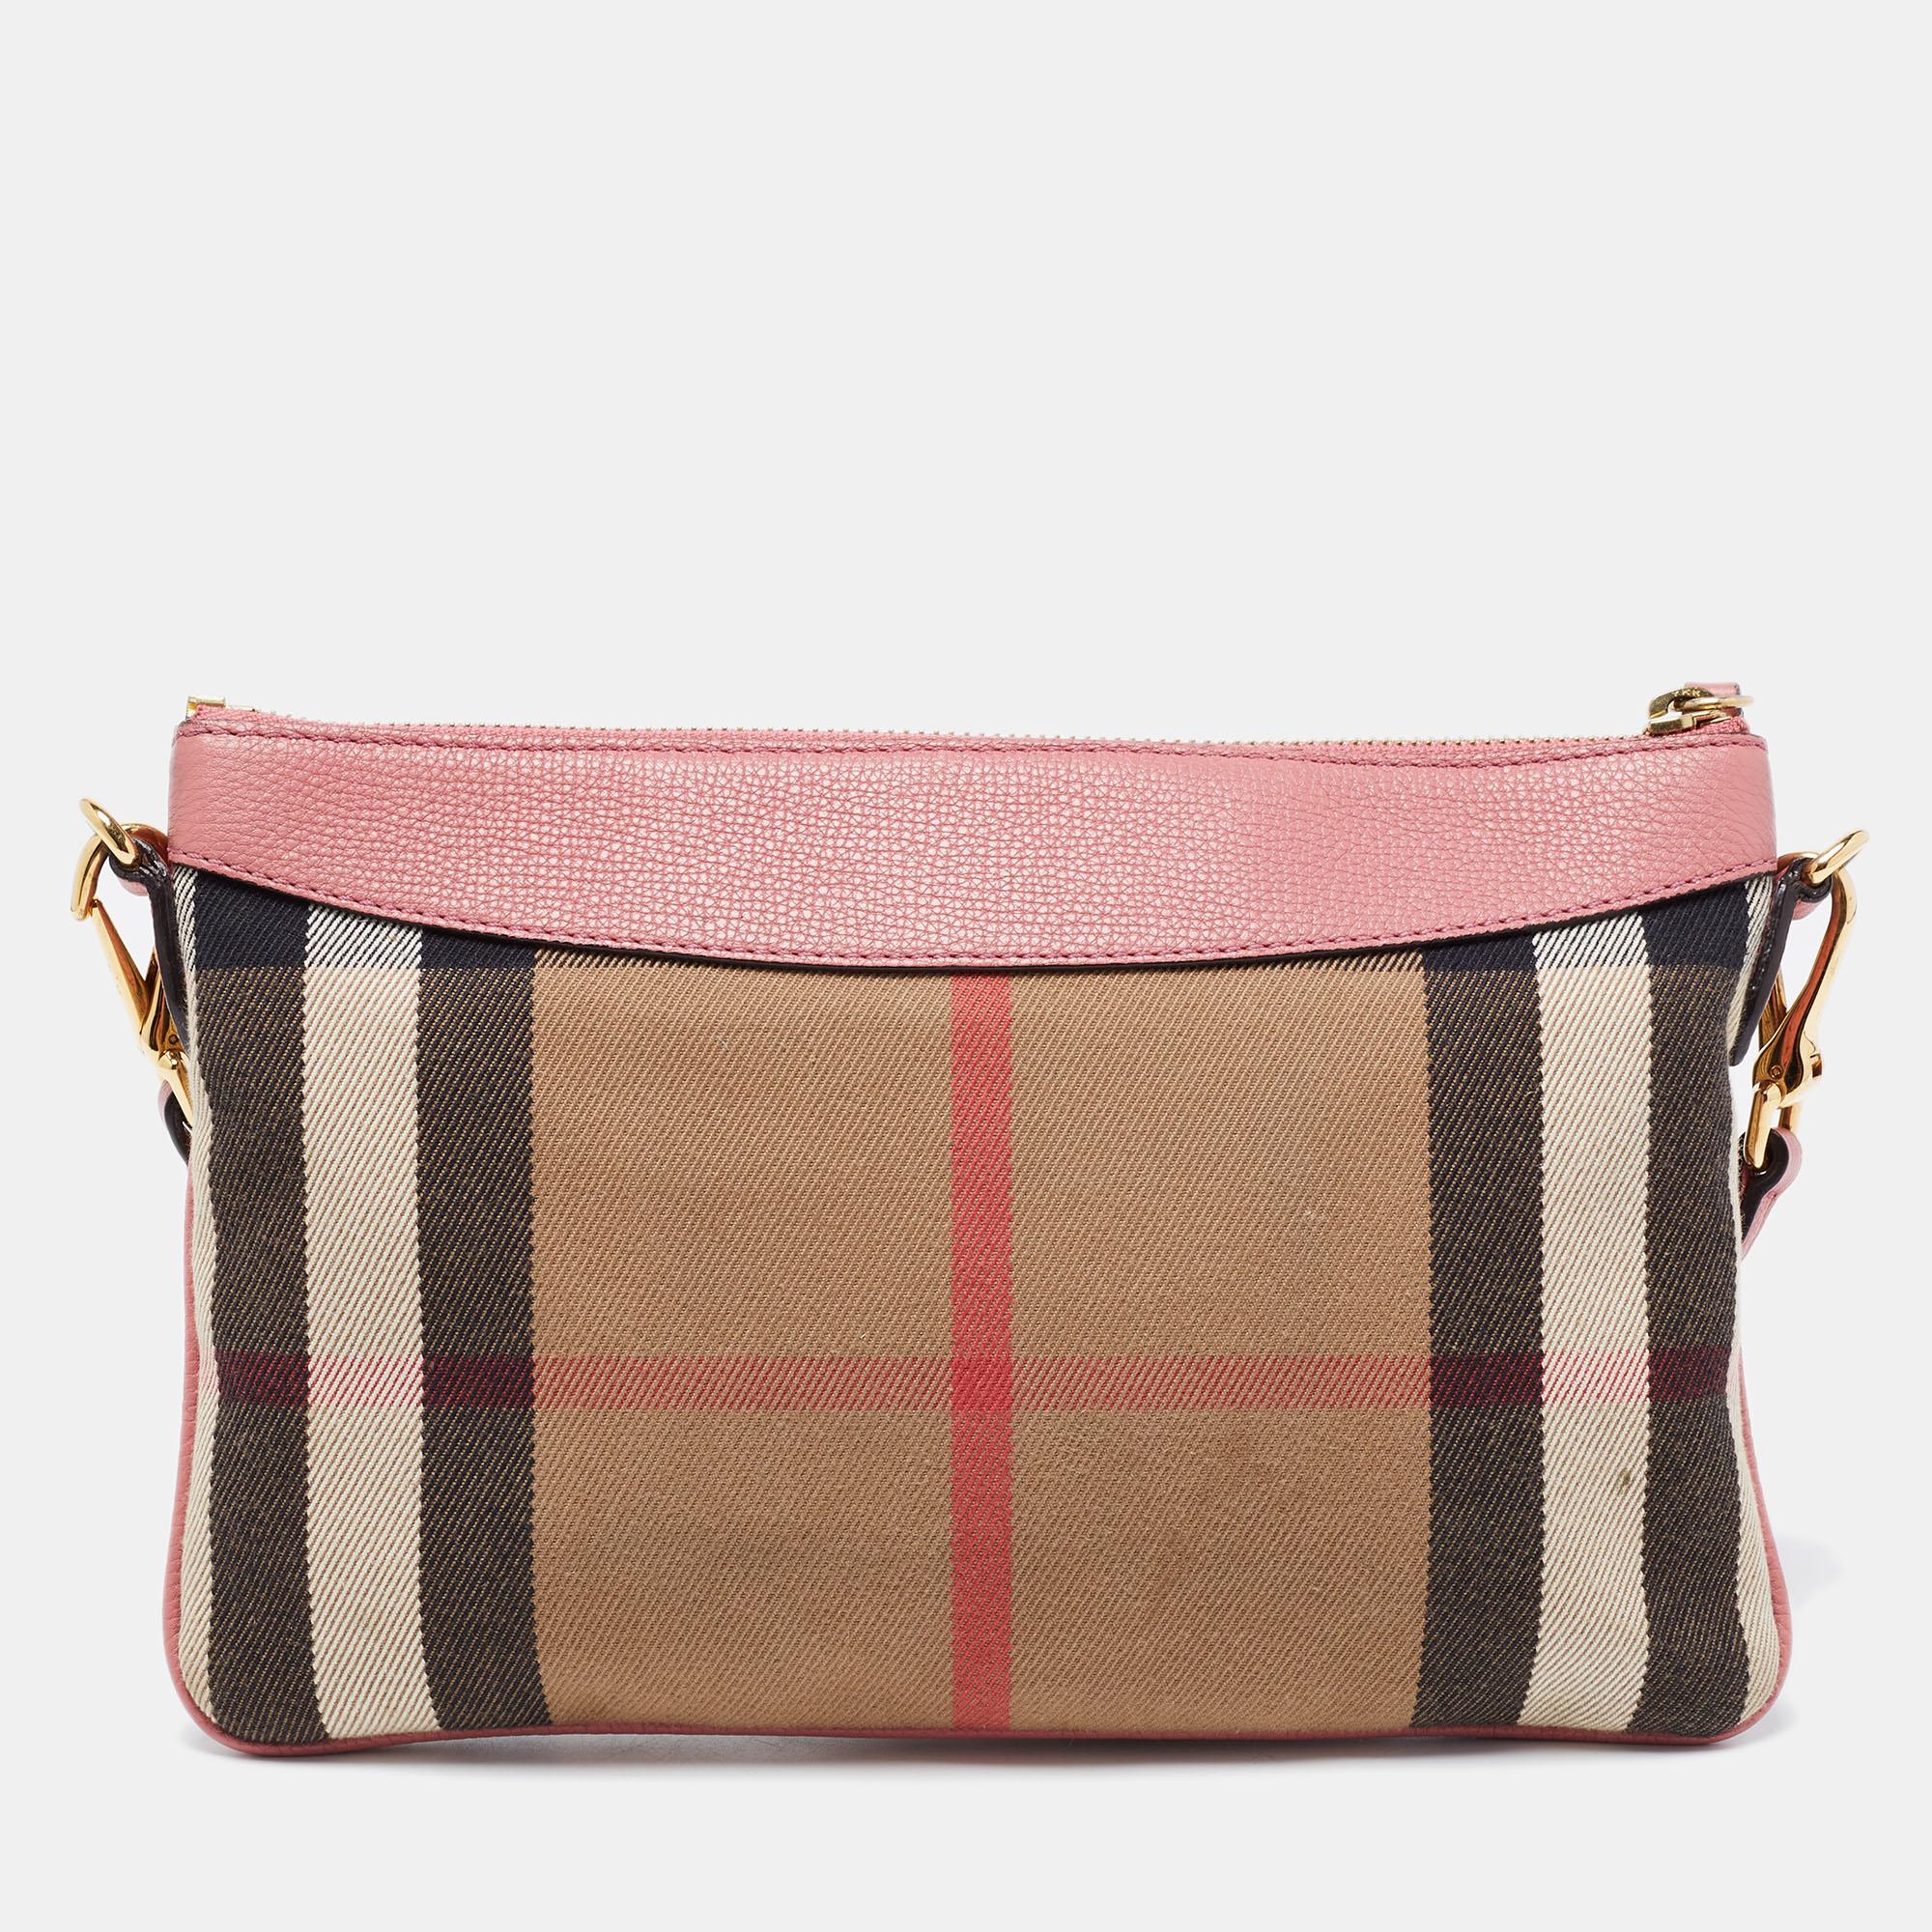 This cute crossbody bag comes from Burberry. It is crafted from House Check canvas and leather into a structured shape. The beige and pink bag has a zip closure, a smooth interior with several slots and is finished with gold-tone hardware.

